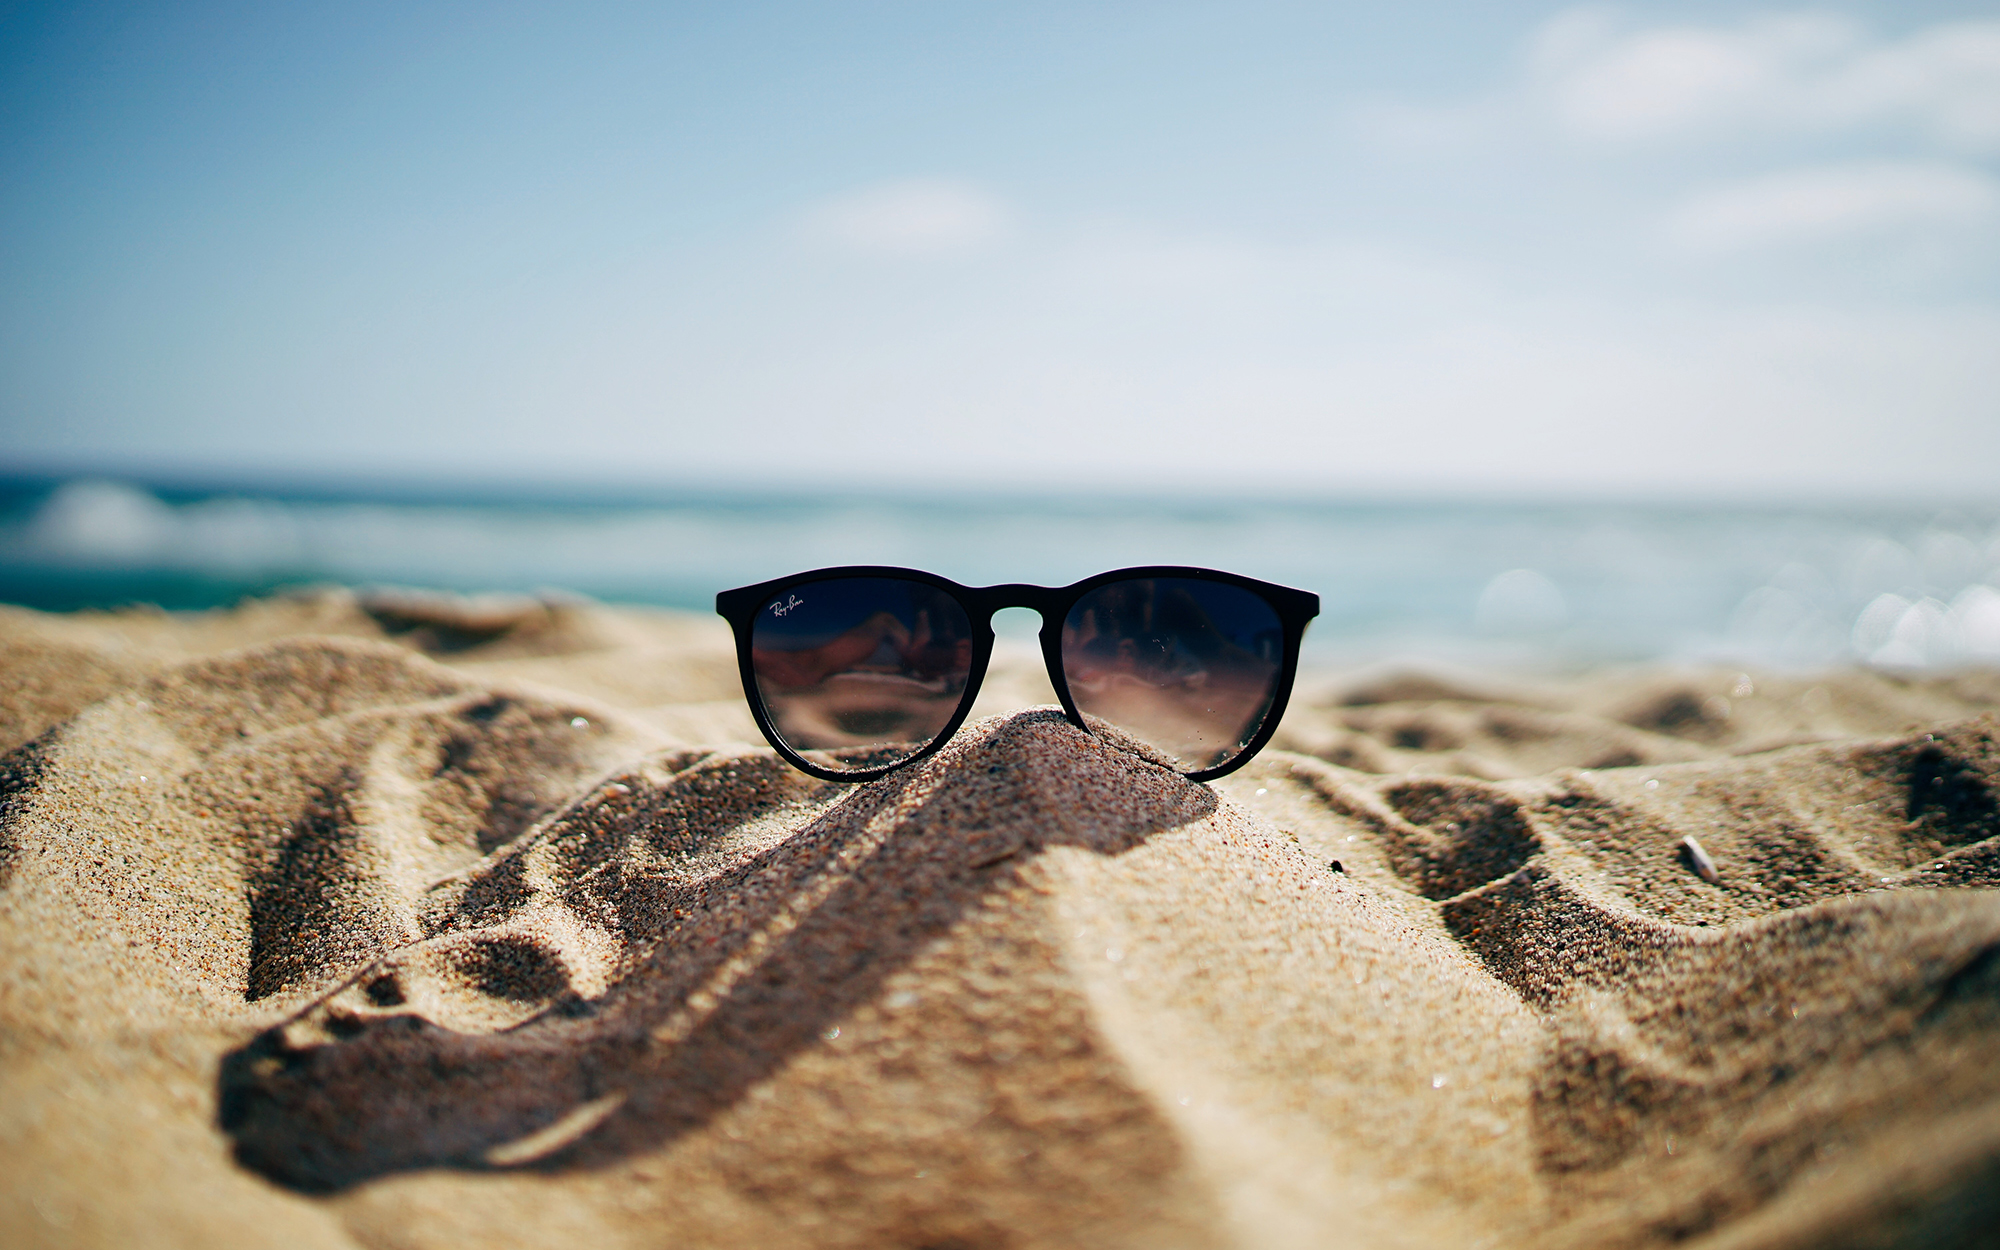 pair of sunglasses balanced on mound of sand with surf in background